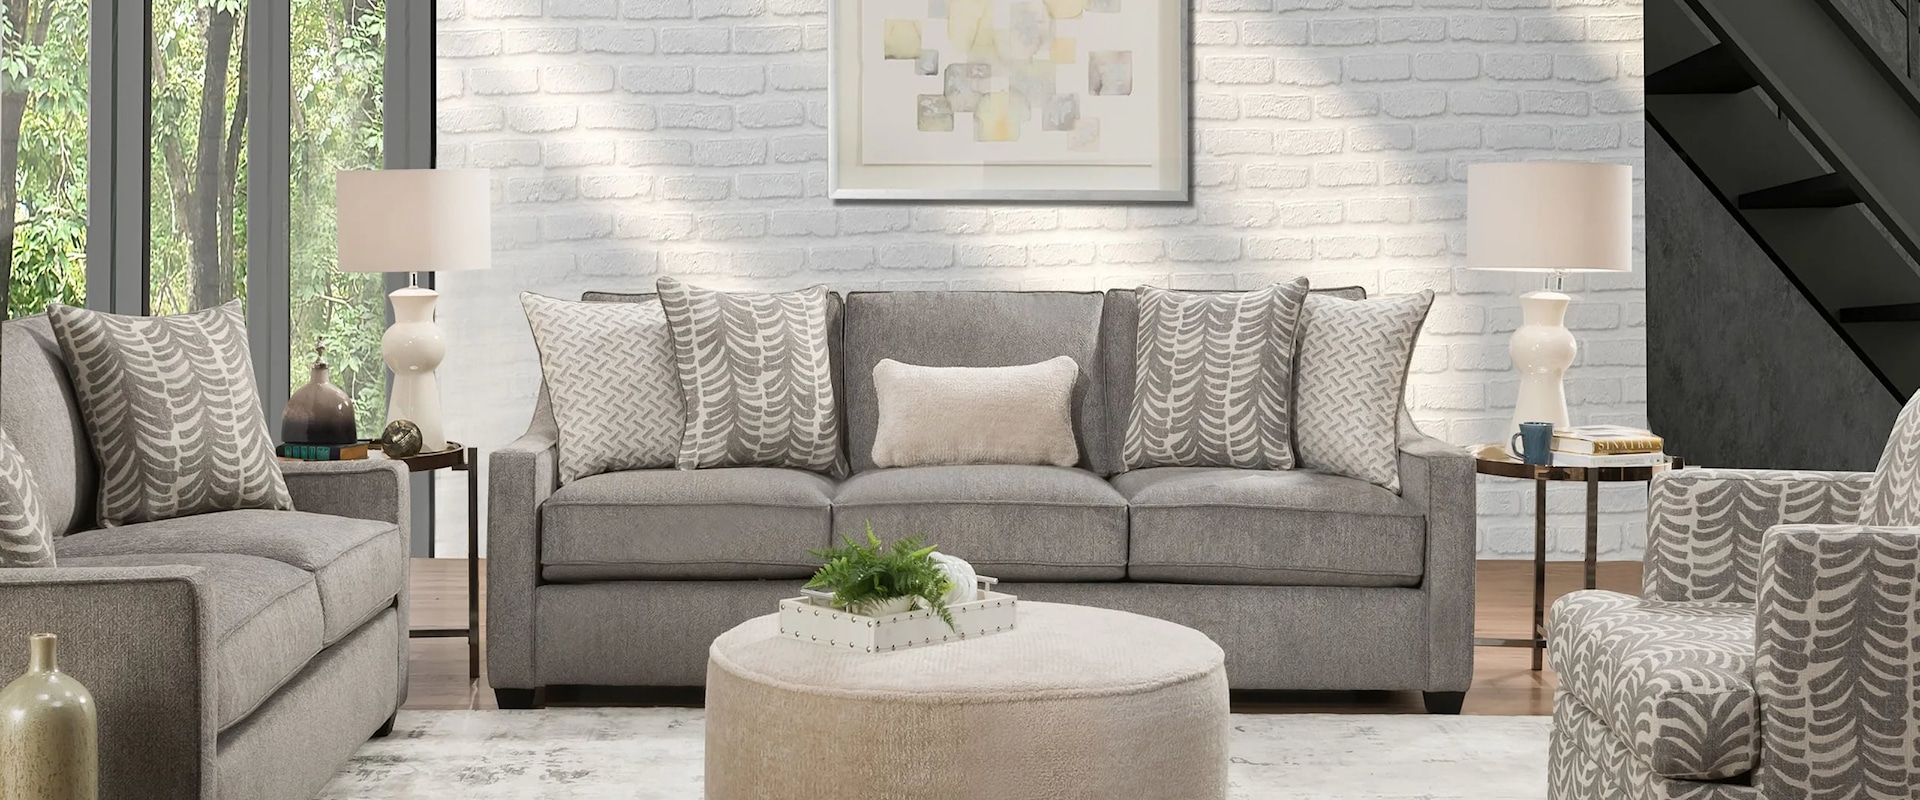 4 Piece Living Room Group w/ Sofa, Loveseat, Swivel Chair & Accent Ottoman